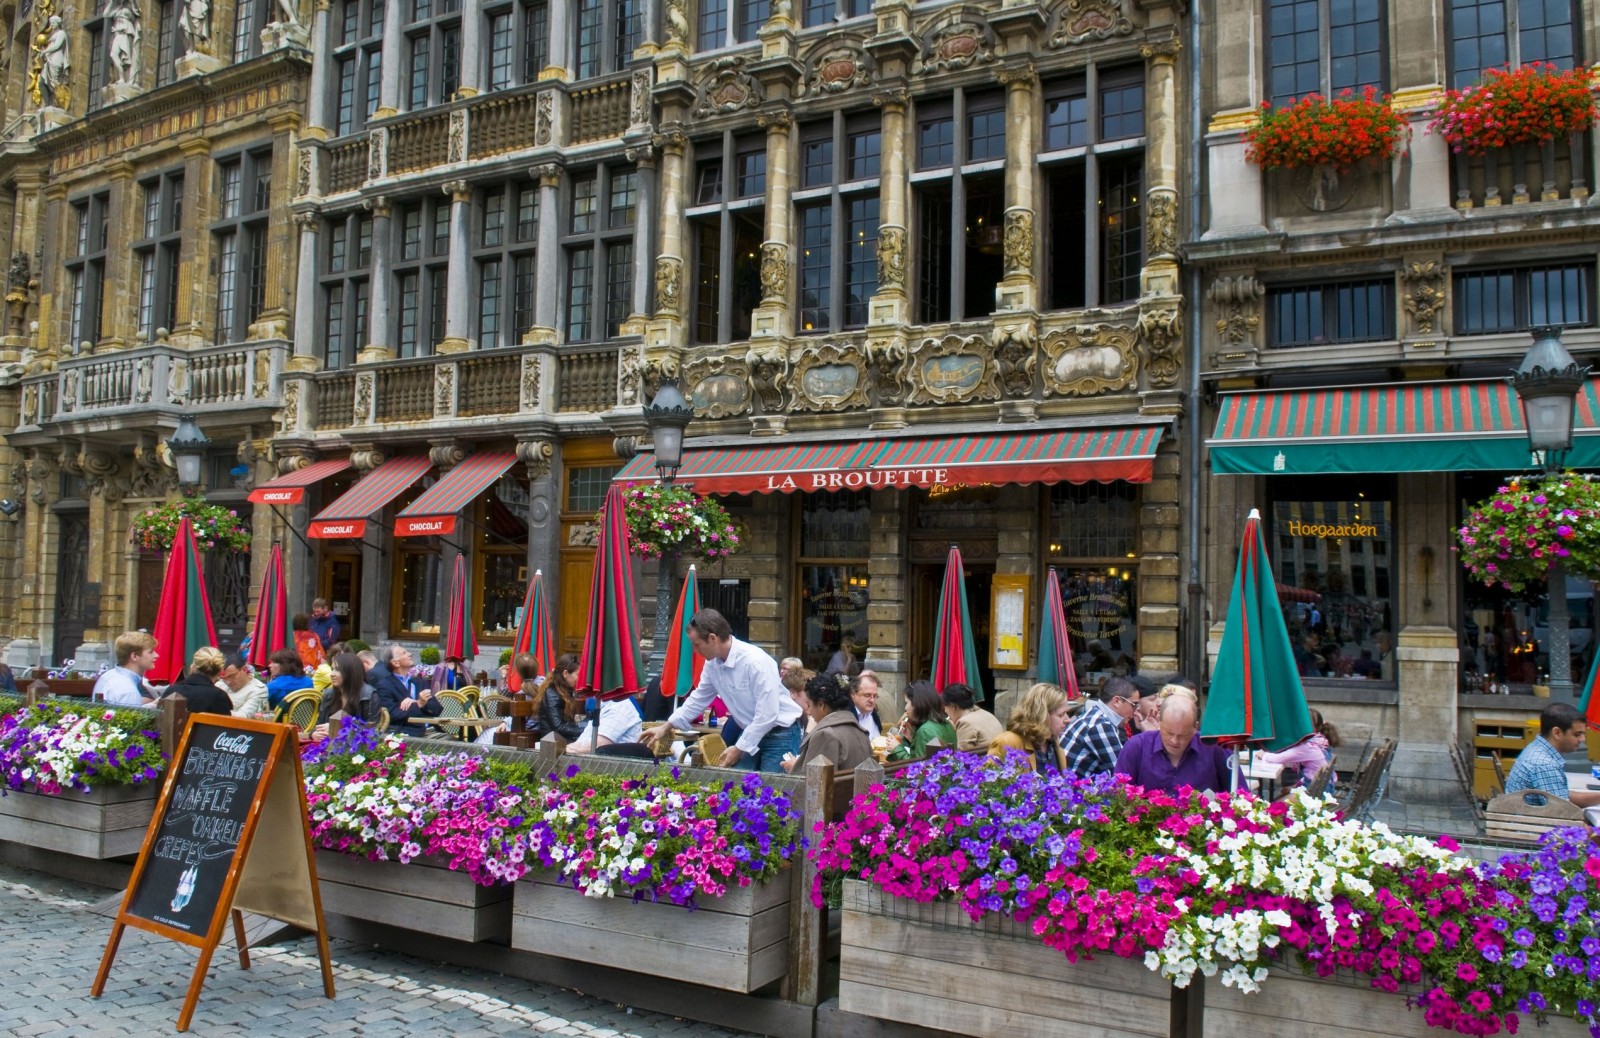 cafe-at-grand-place-brussels-belgium-1600x1038.jpg